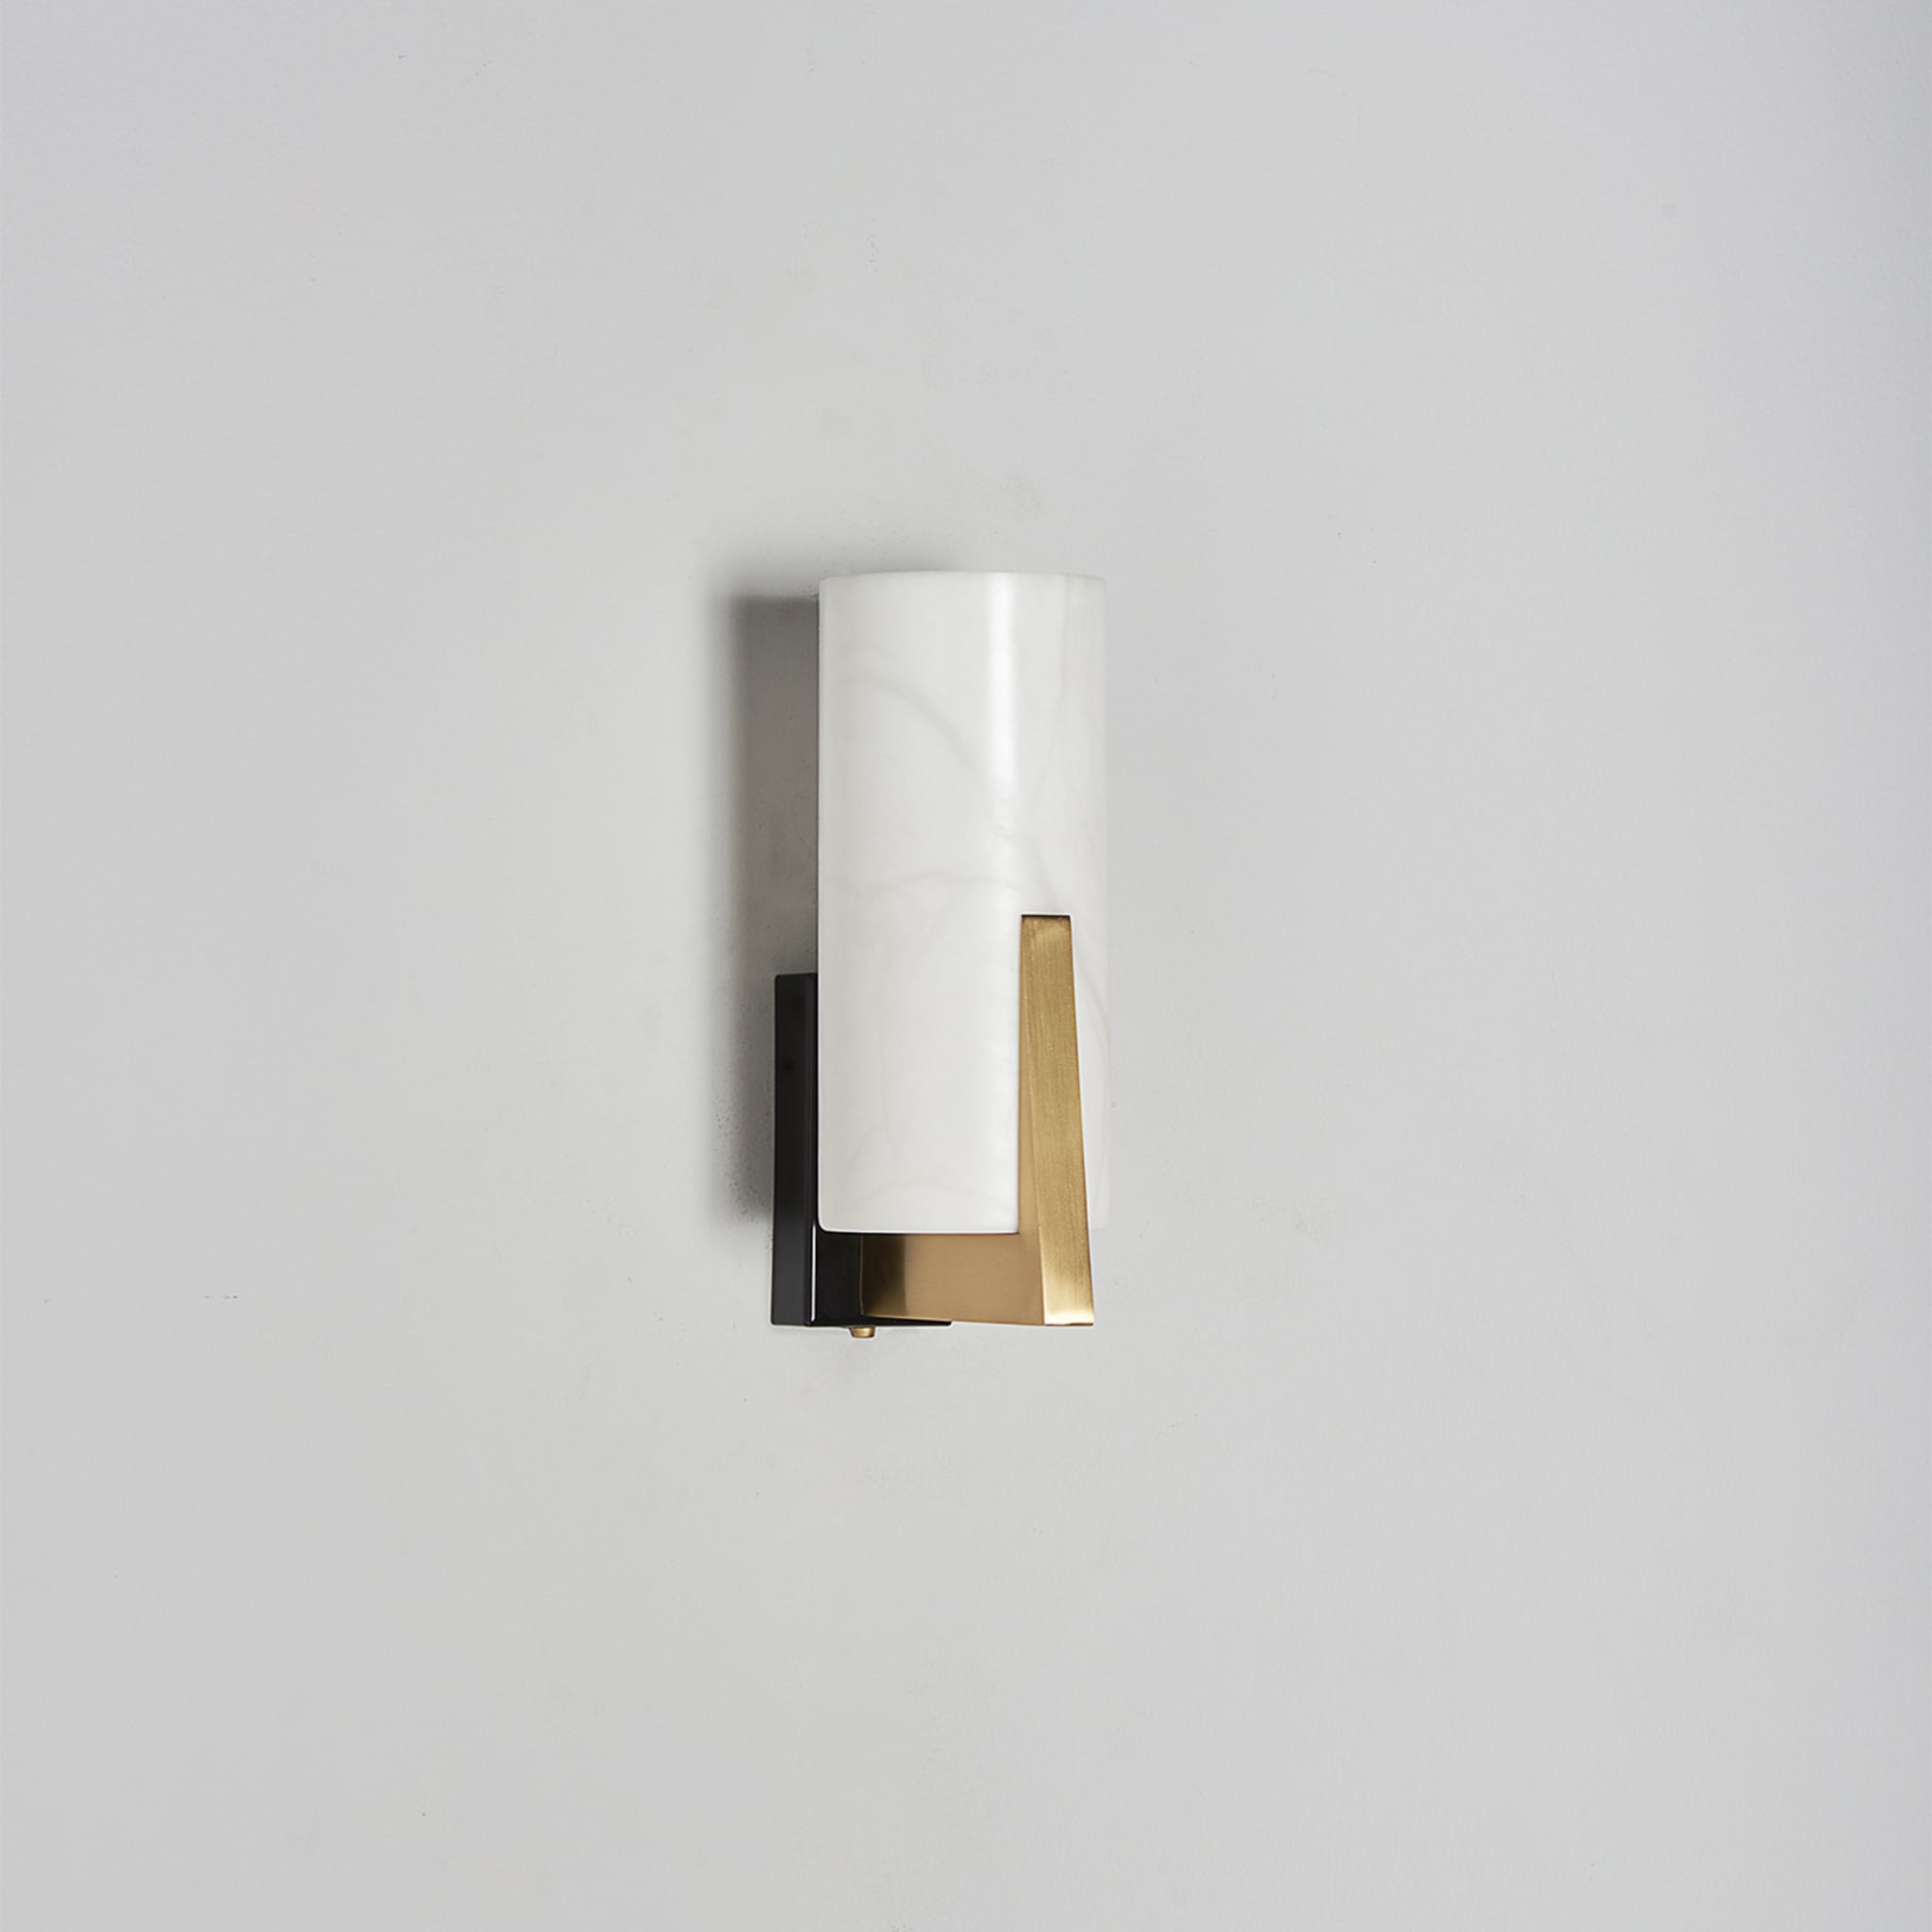 "Zeno" Wall Sconce in Satin Brass, Mat Black and Alabaster - Alternative view 1